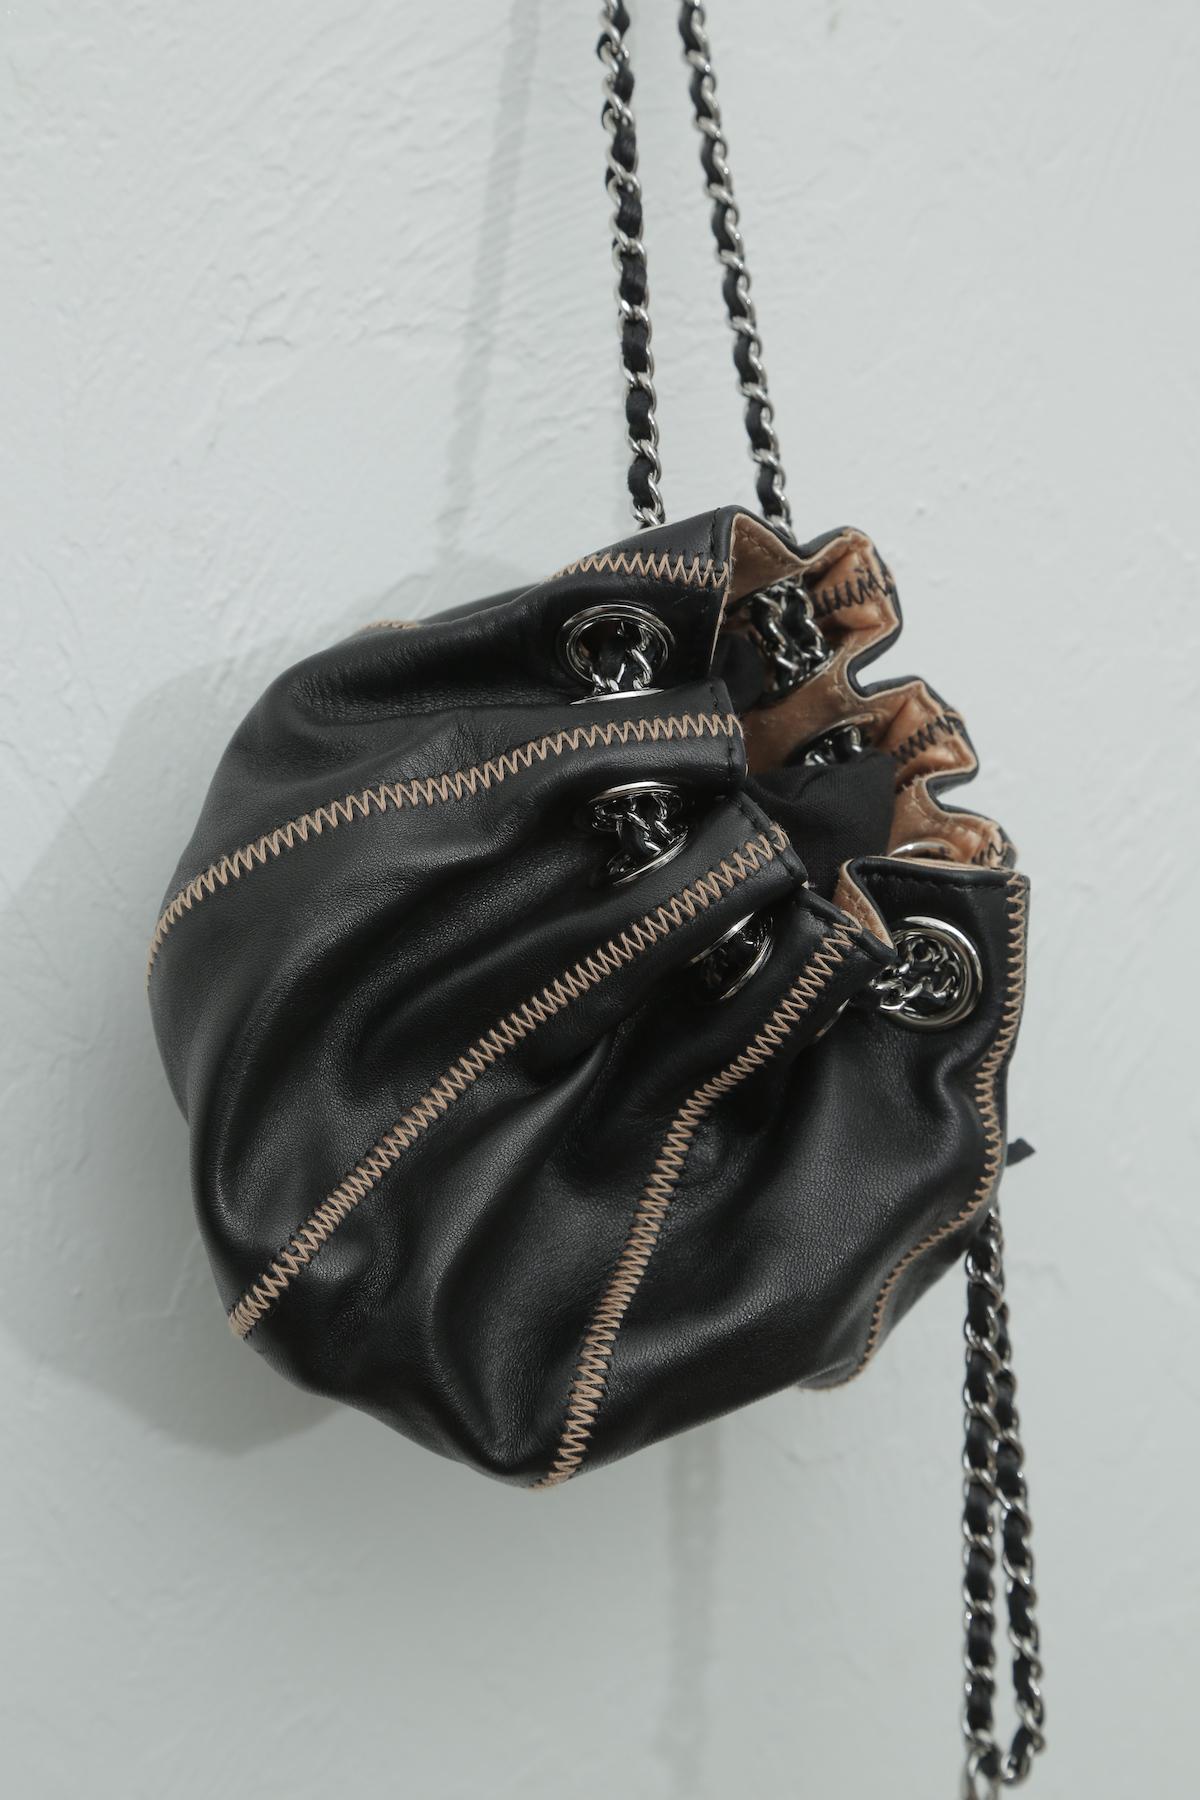 Like new
This item may have been worn but has no visible signs of wear.

Description:
This stylish pouch is rafted of luxuriously soft lambskin leather in black. This bag is stitched in a sac form with light pink stitching. The bag features silver